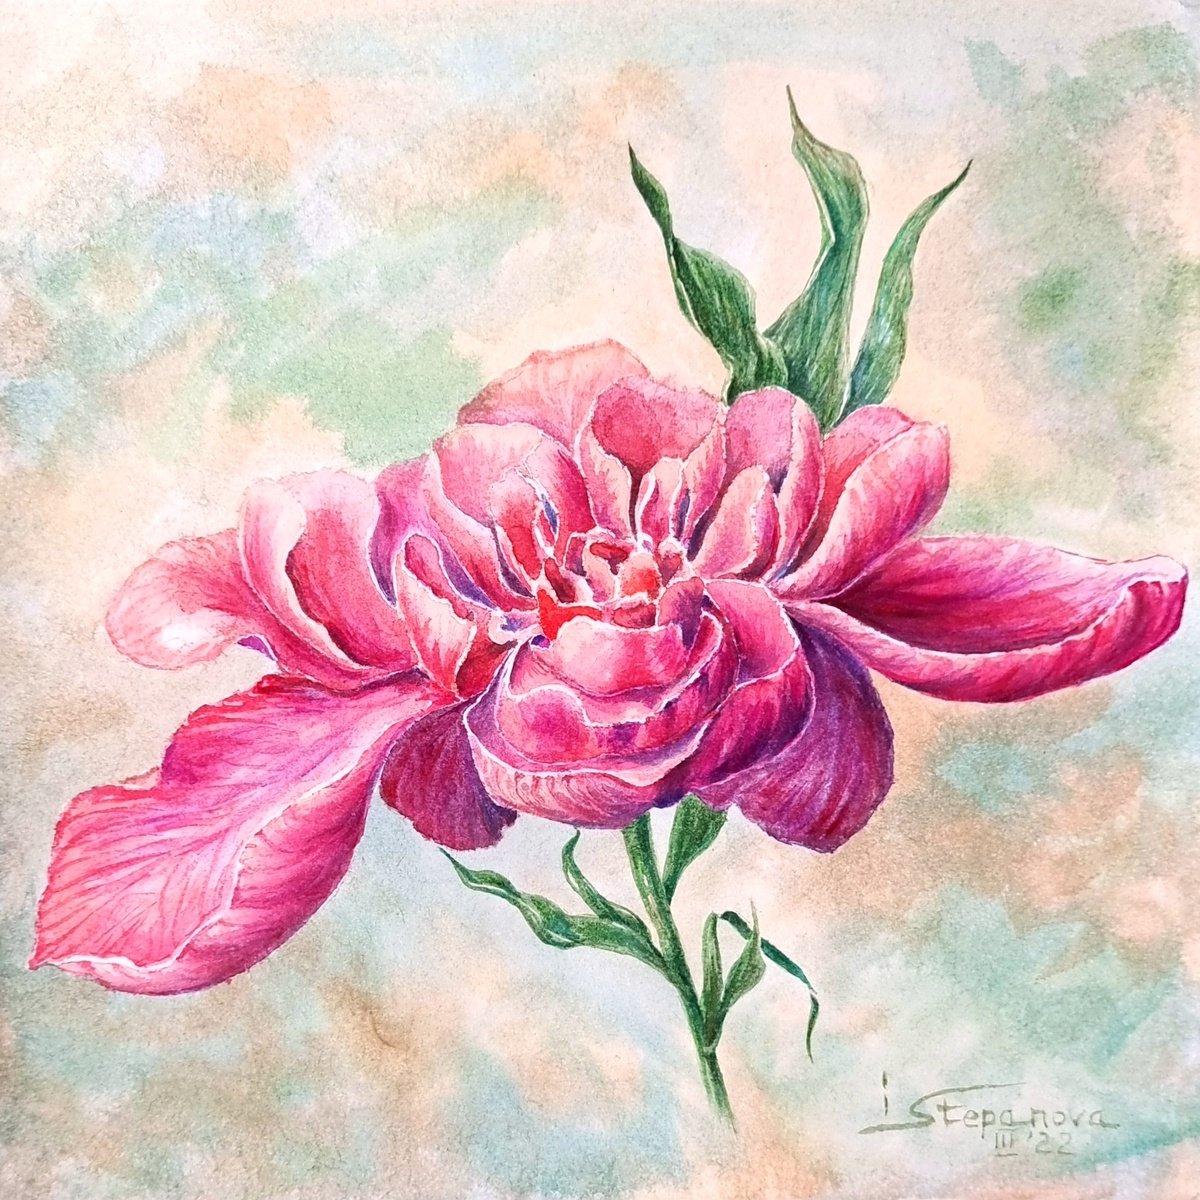 Watercolor peony - a cozy painting - botanical bright accents with bright purple-red flowe... by Irina Stepanova